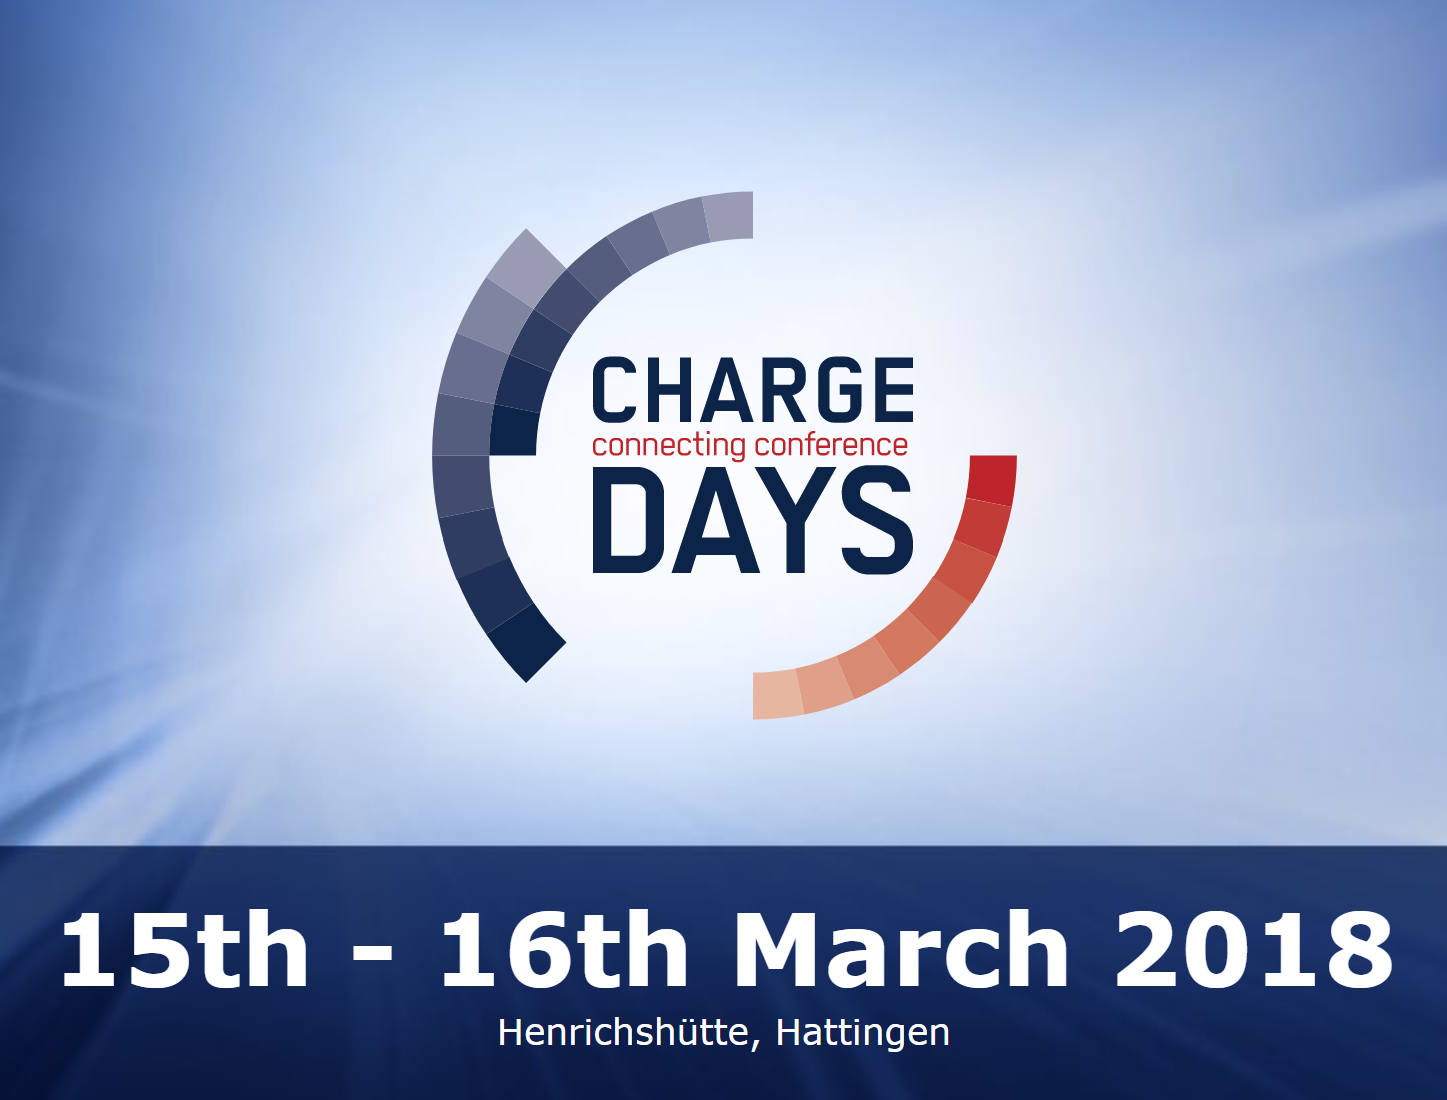 CHARGE DAYS